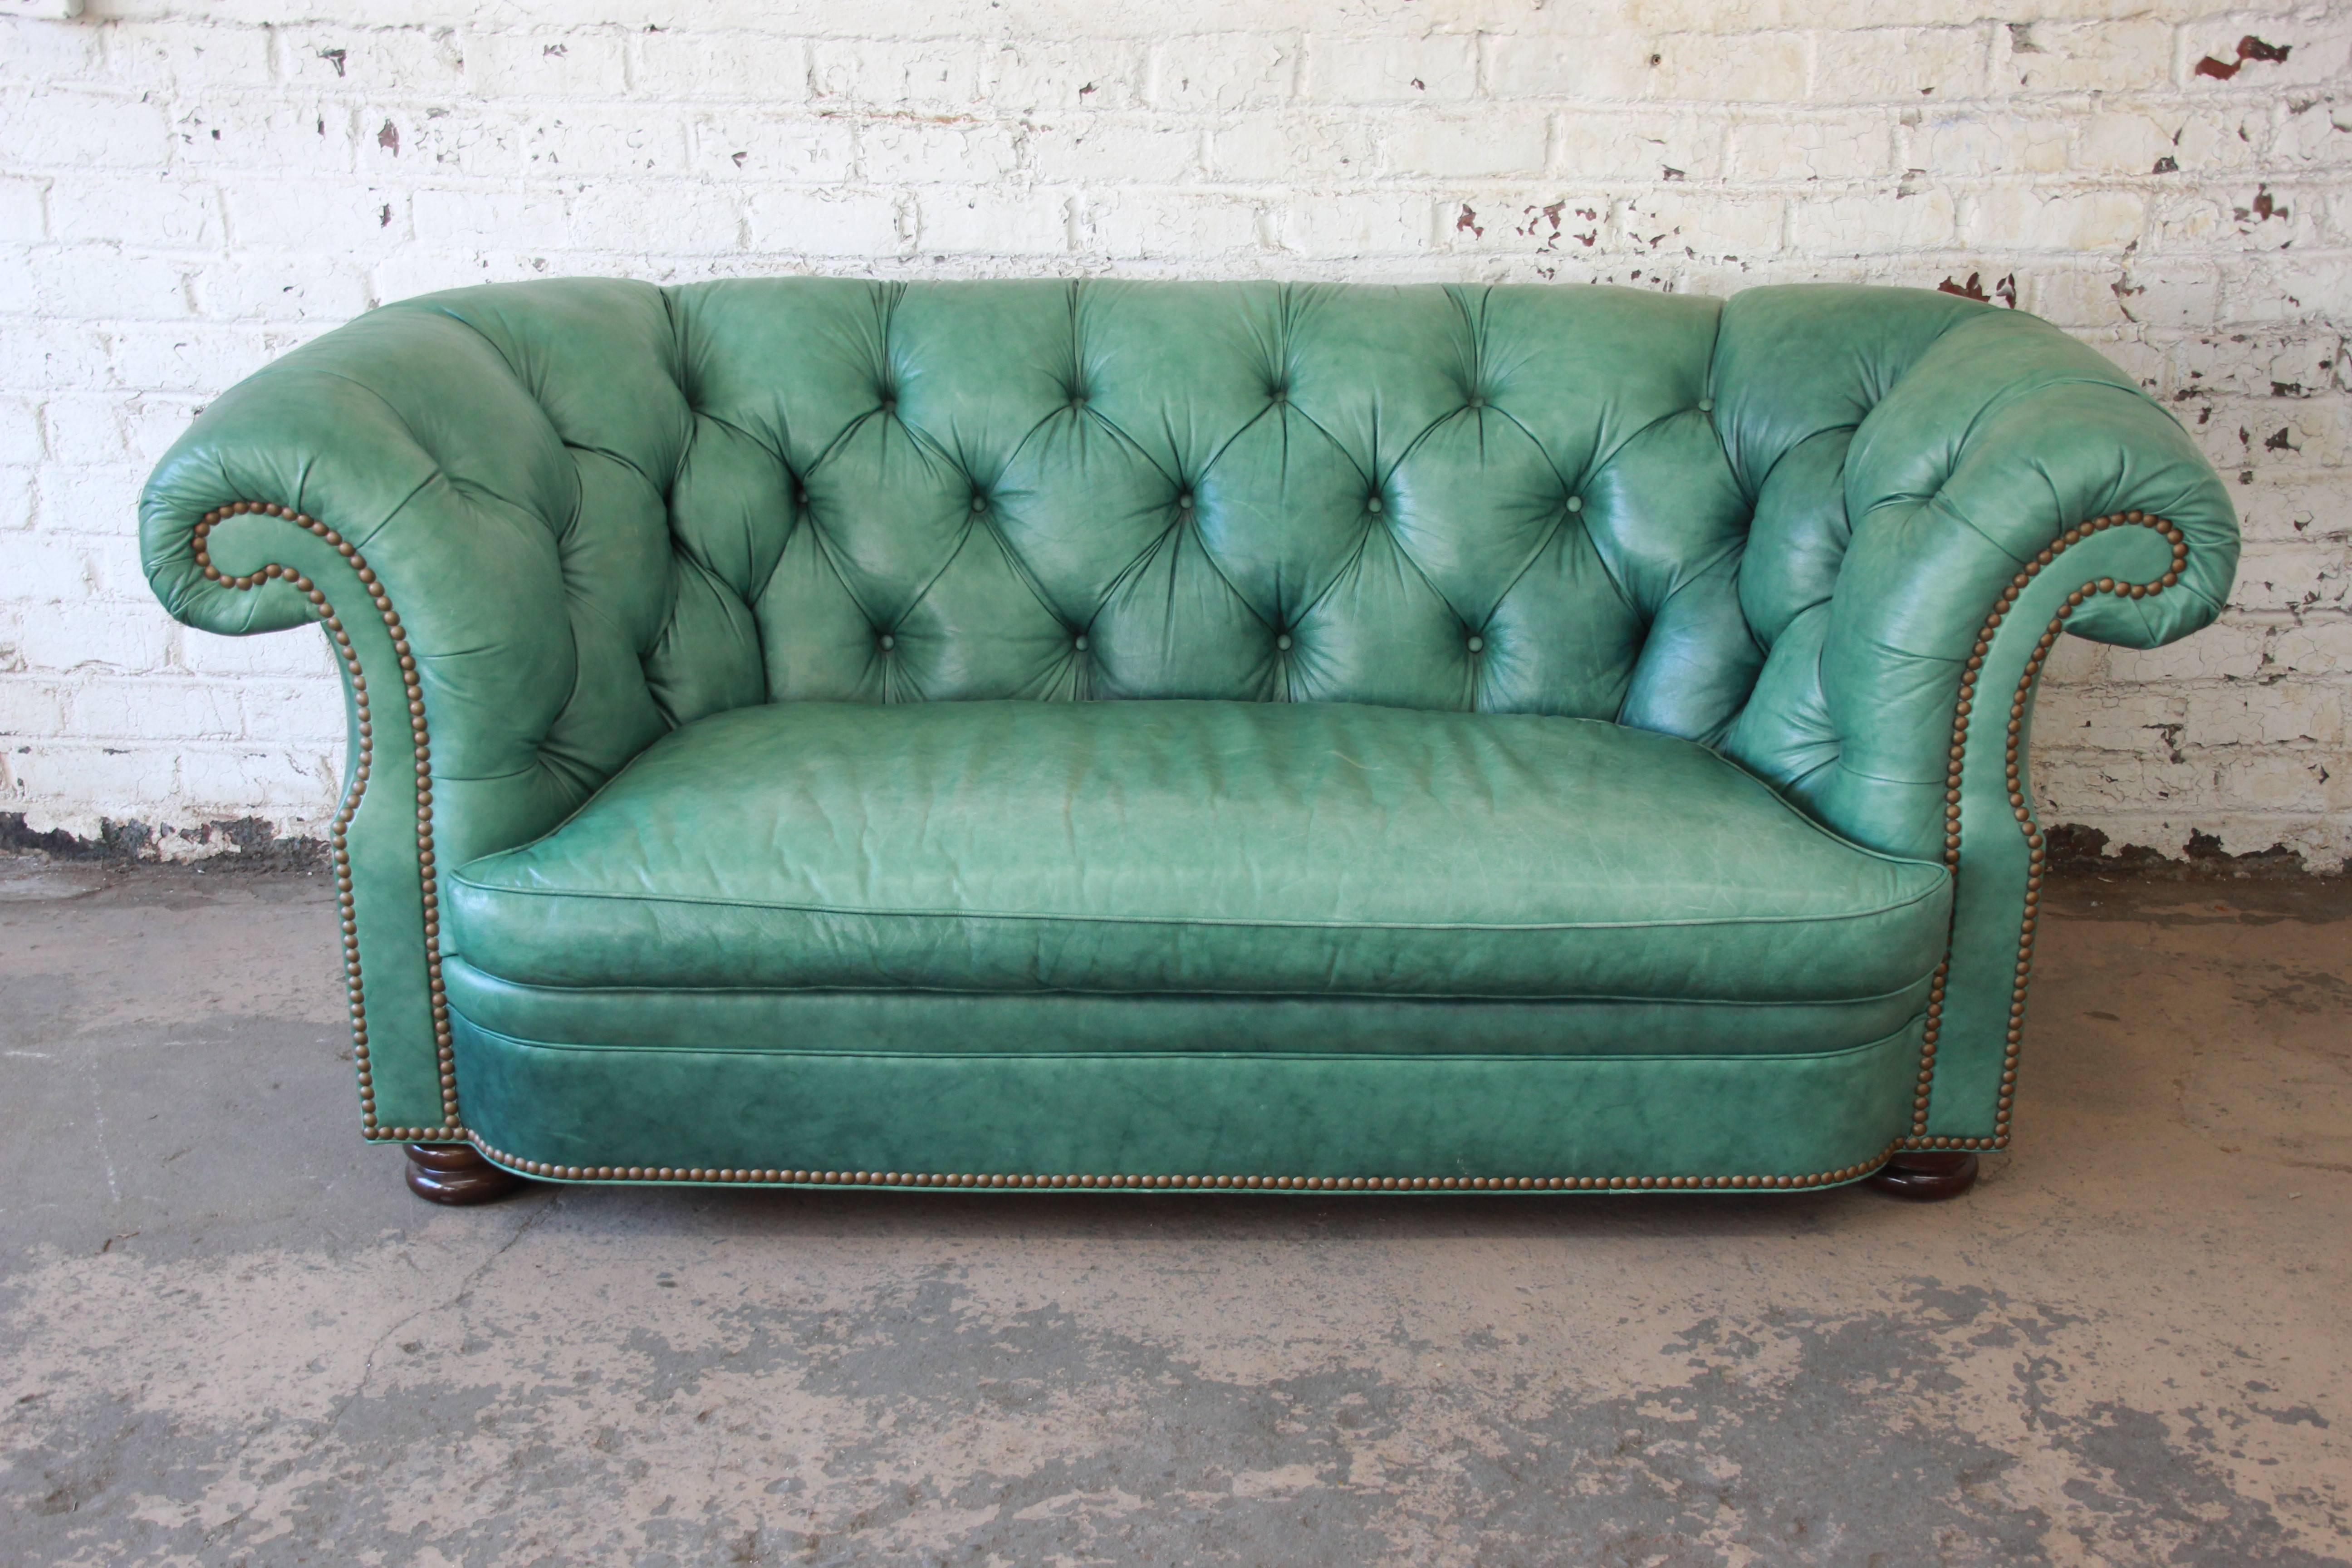 An outstanding vintage tufted leather Chesterfield style sofa by Hancock & Moore. The sofa features beautifully aged teal leather, with brass nailhead trim and solid mahogany bun feet. It is very comfortable and in very good vintage condition, with